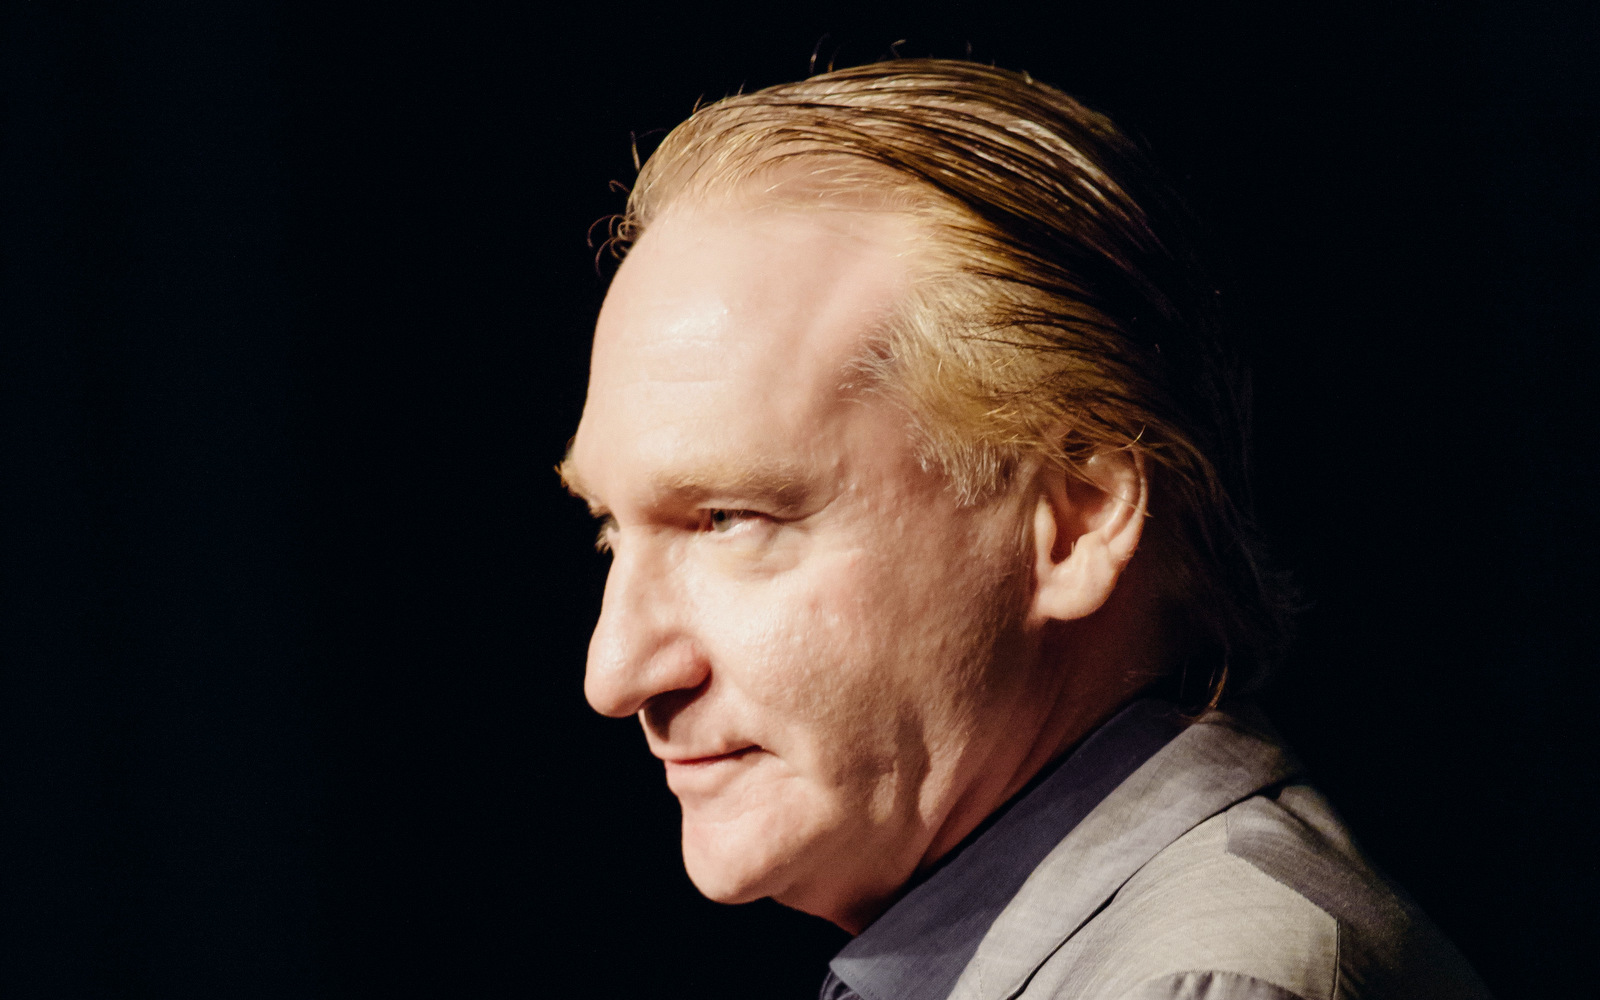 Bill Maher, winner of the First Amendment Award, speaks to the crowd at the 26th Annual Literary Awards Festival at the Beverly Wilshire Hotel on Wednesday, September 28, 2016, in Beverly Hills, Calif (Photo by Casey Curry/Invision/AP)